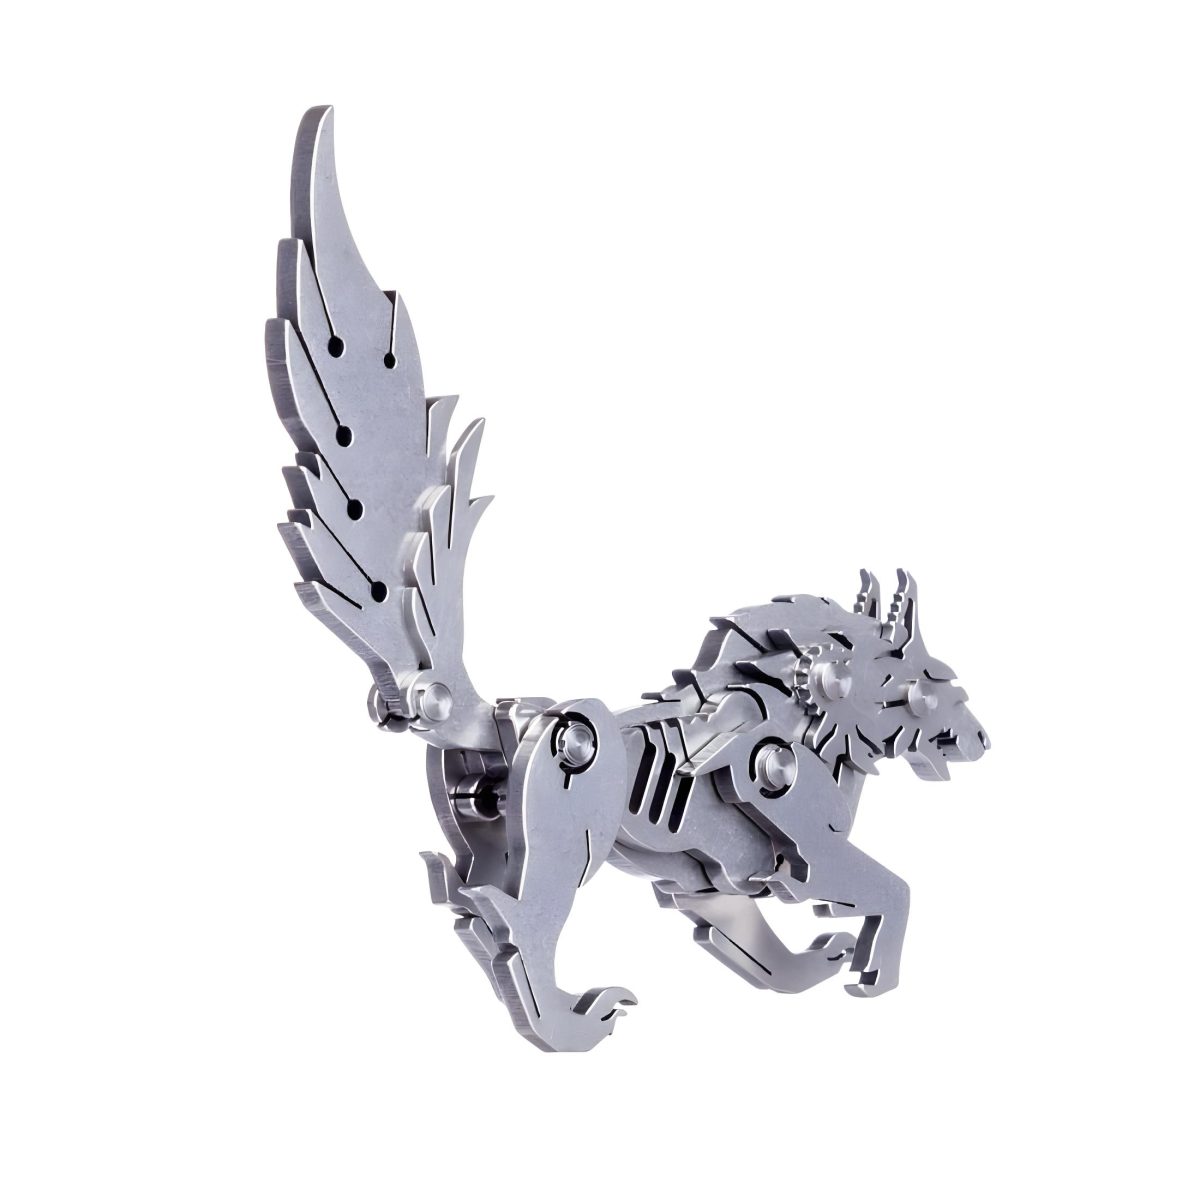 Metal Puzzle 3D Animal Series (Griffin, Wolf, Cow, Horse)